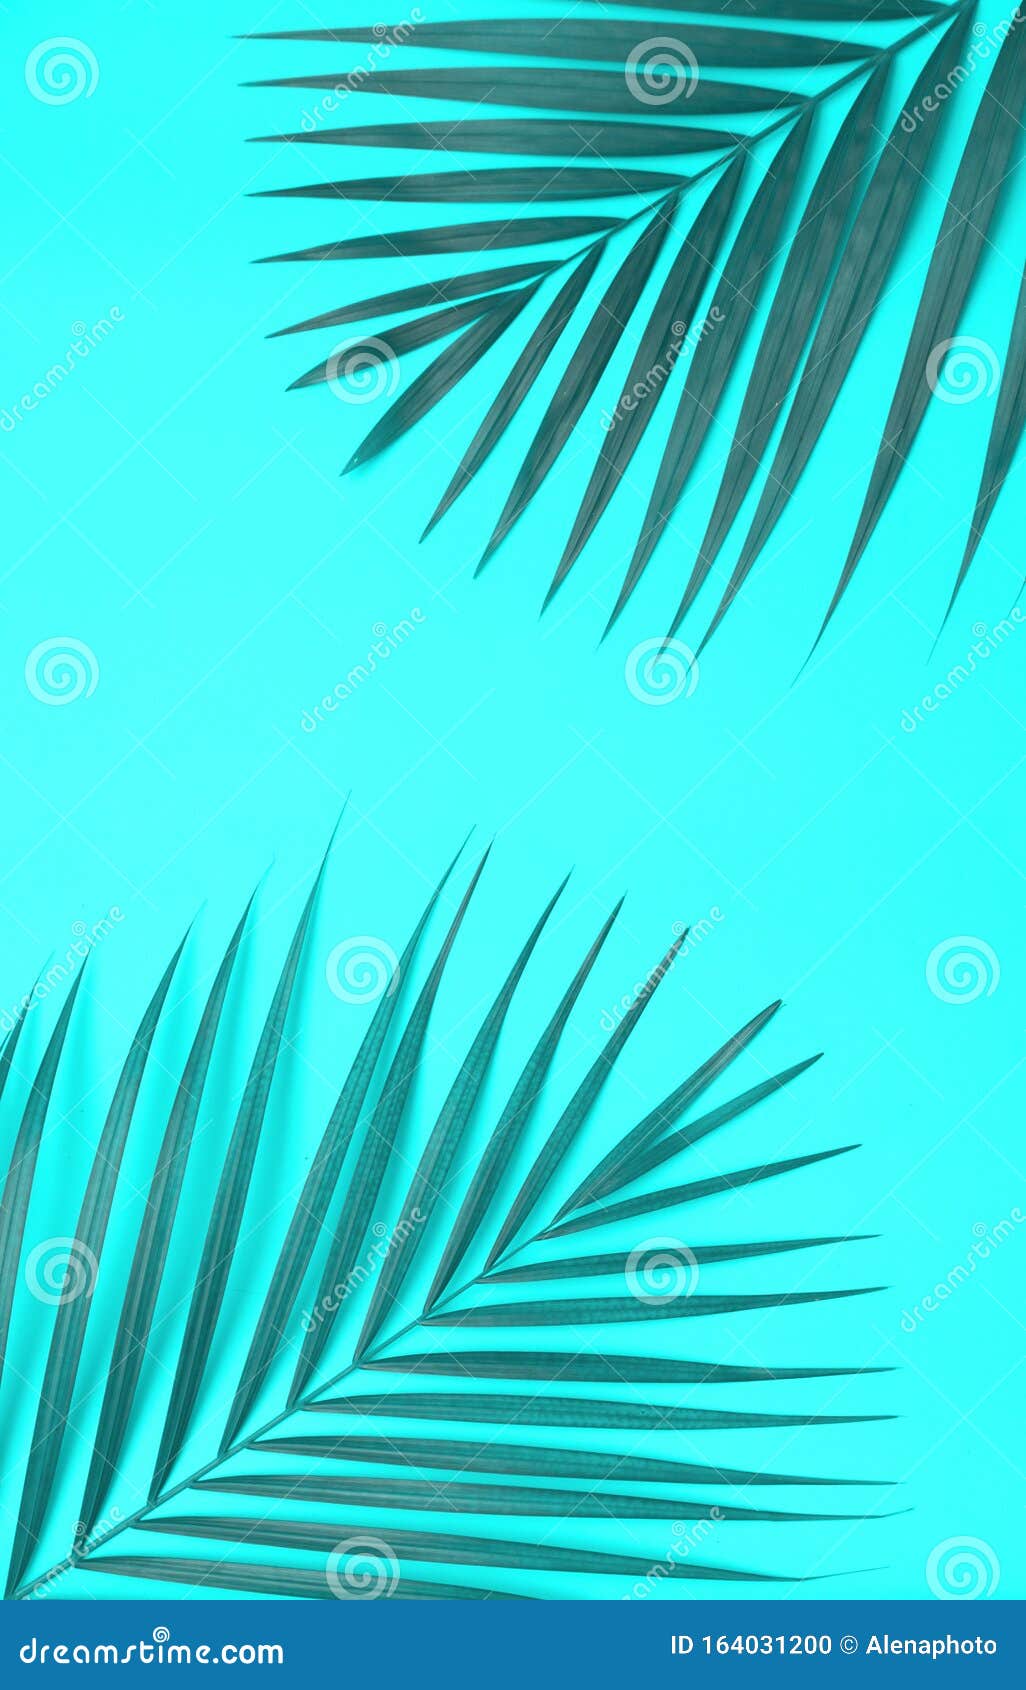 Palm Leaves on Blue Background Stock Photo - Image of abstract, pattern